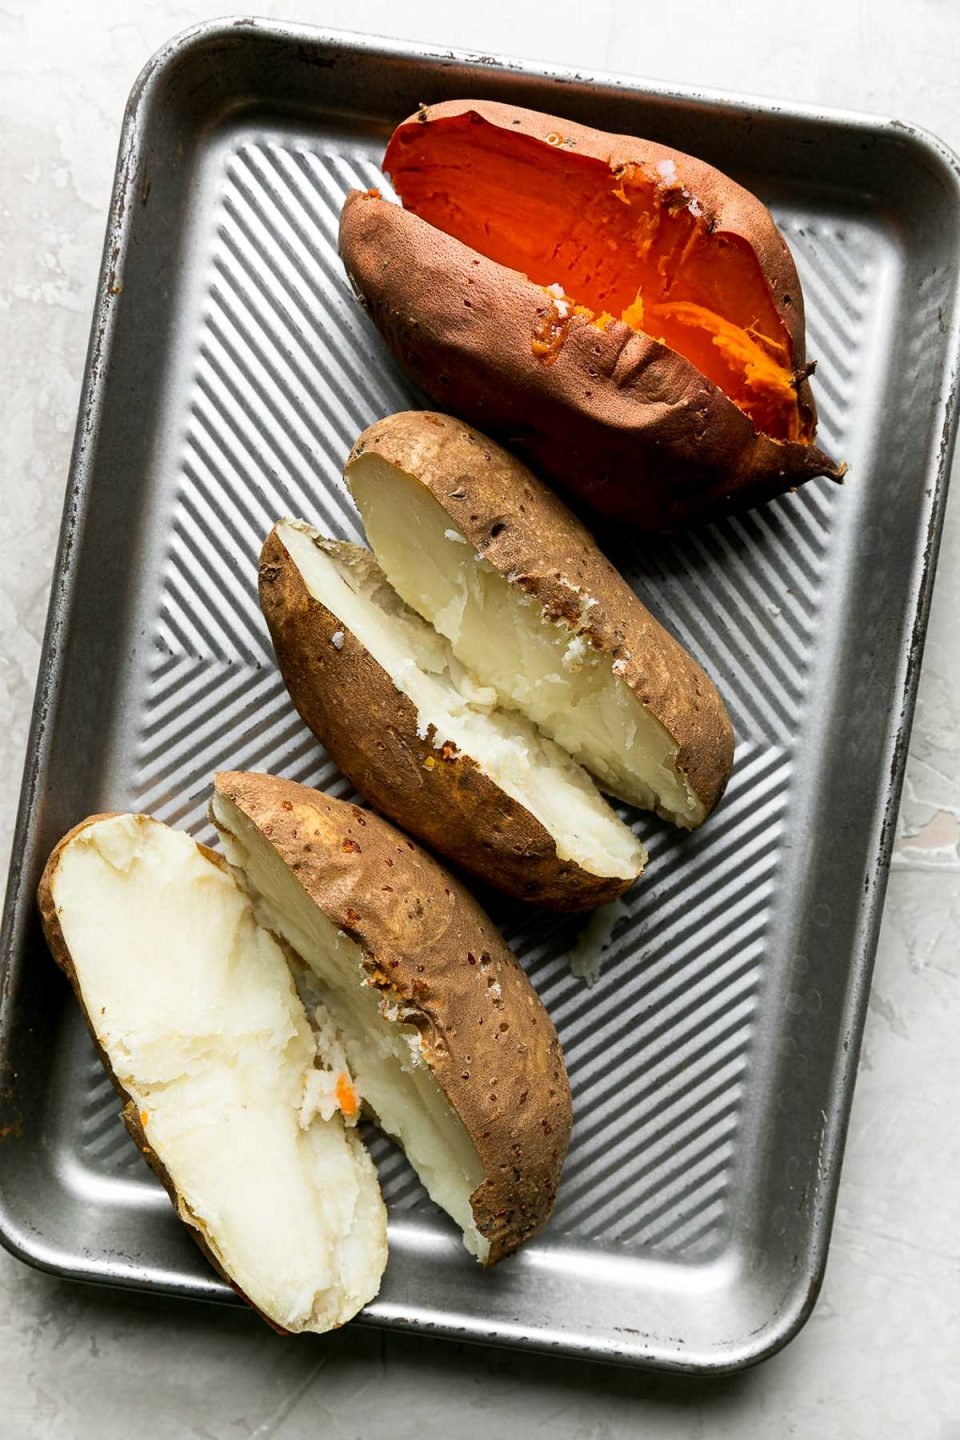 Two baked russet potatoes and one baked sweet potato that have all been cut in half lengthwise rest on a small aluminum cutting board. The cutting board rests on a creamy white plaster textured surface.